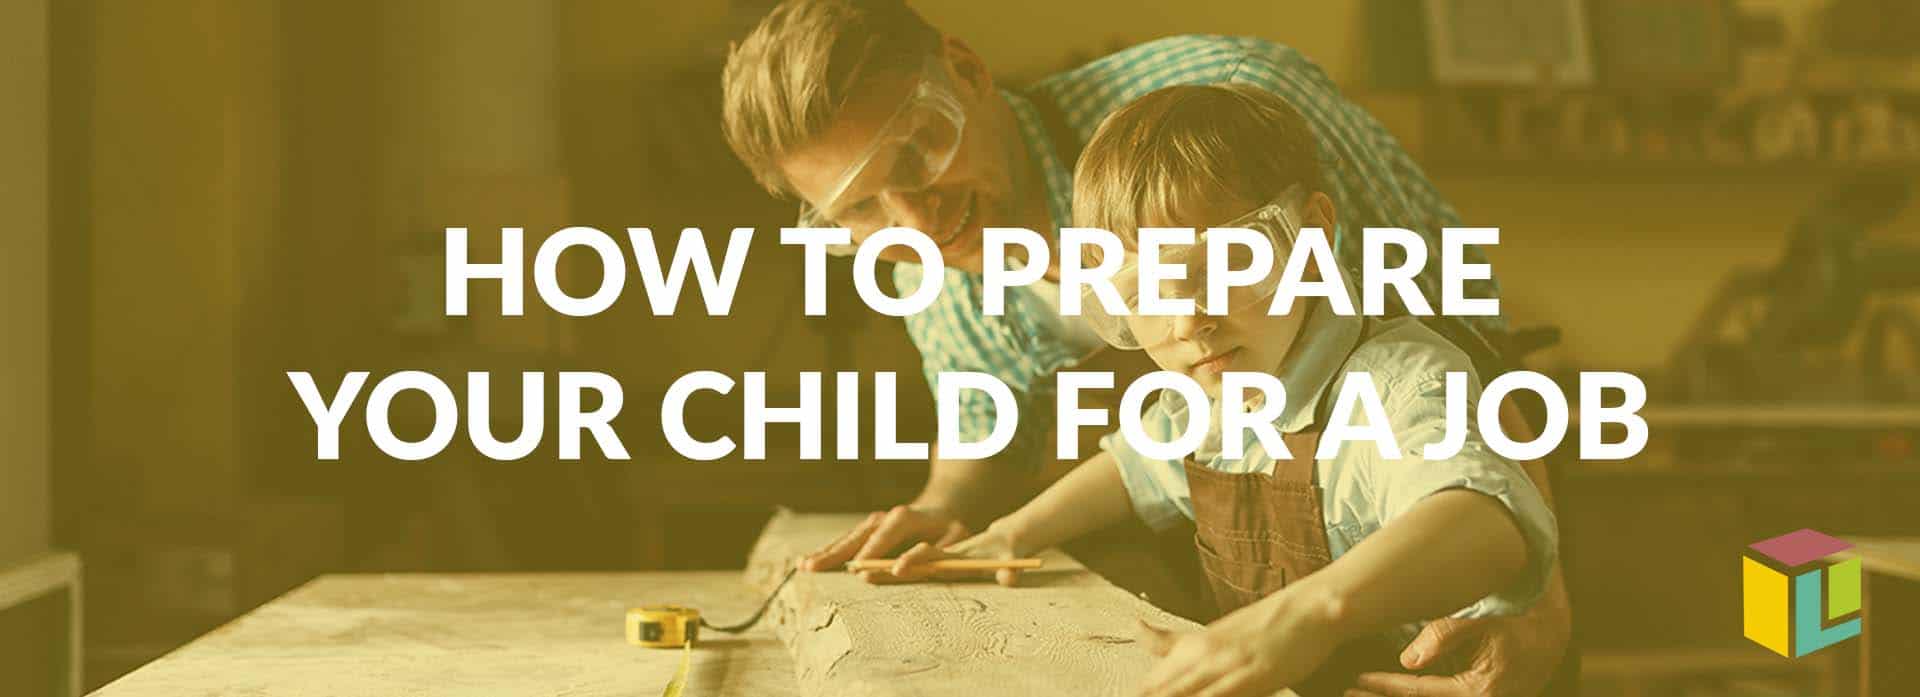 How To Prepare Your Child For A Job